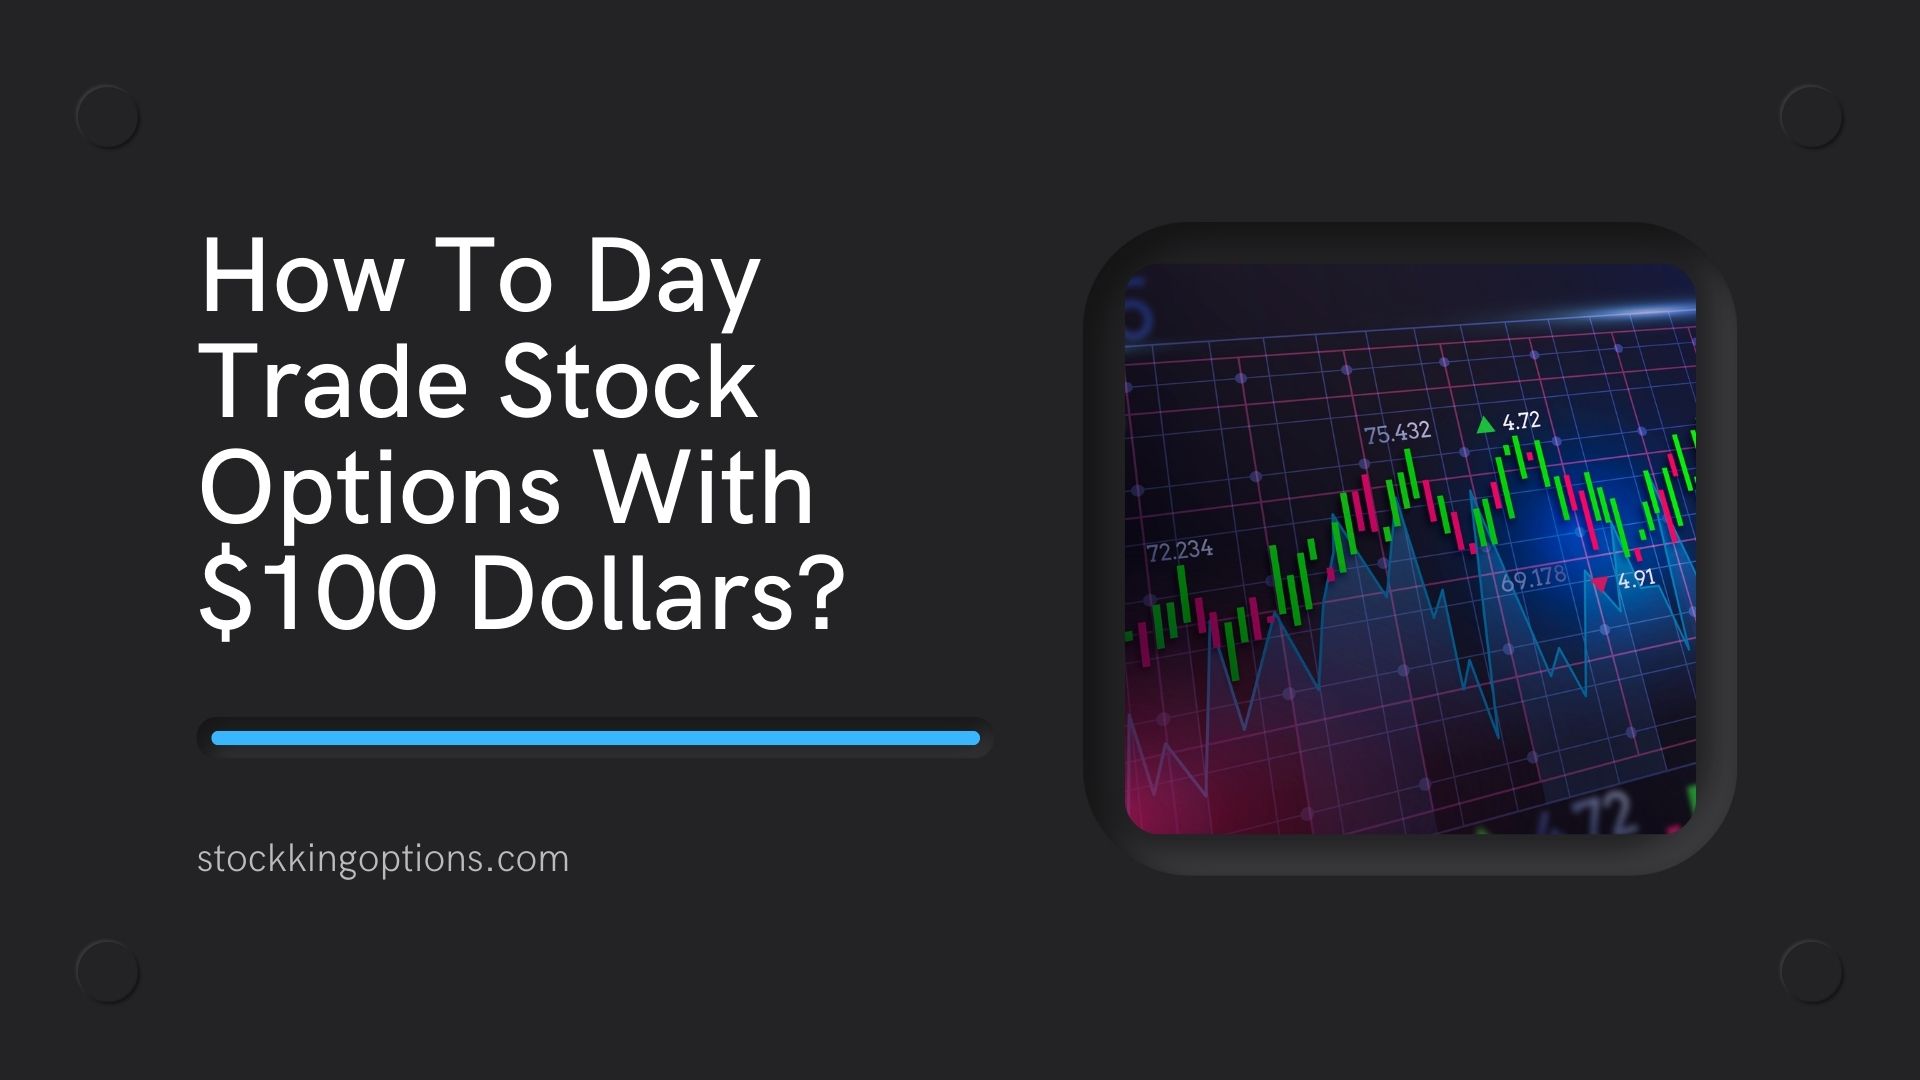 How To Day Trade Stock Options With $100 Dollars